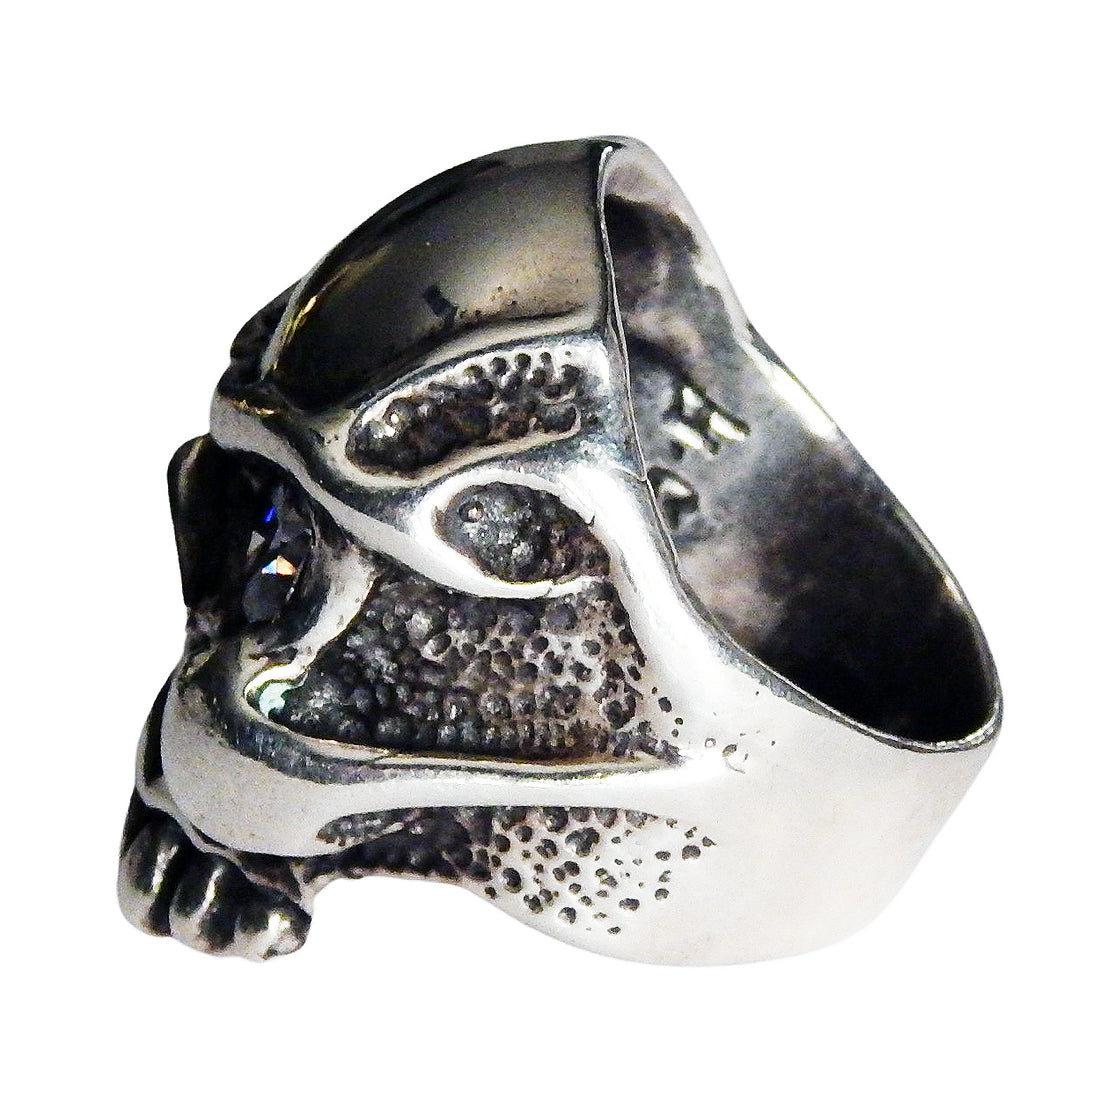 DOUBLE CROSS by Travis Walker - "TOOTHLESS SKULL" Ring with Large CZs